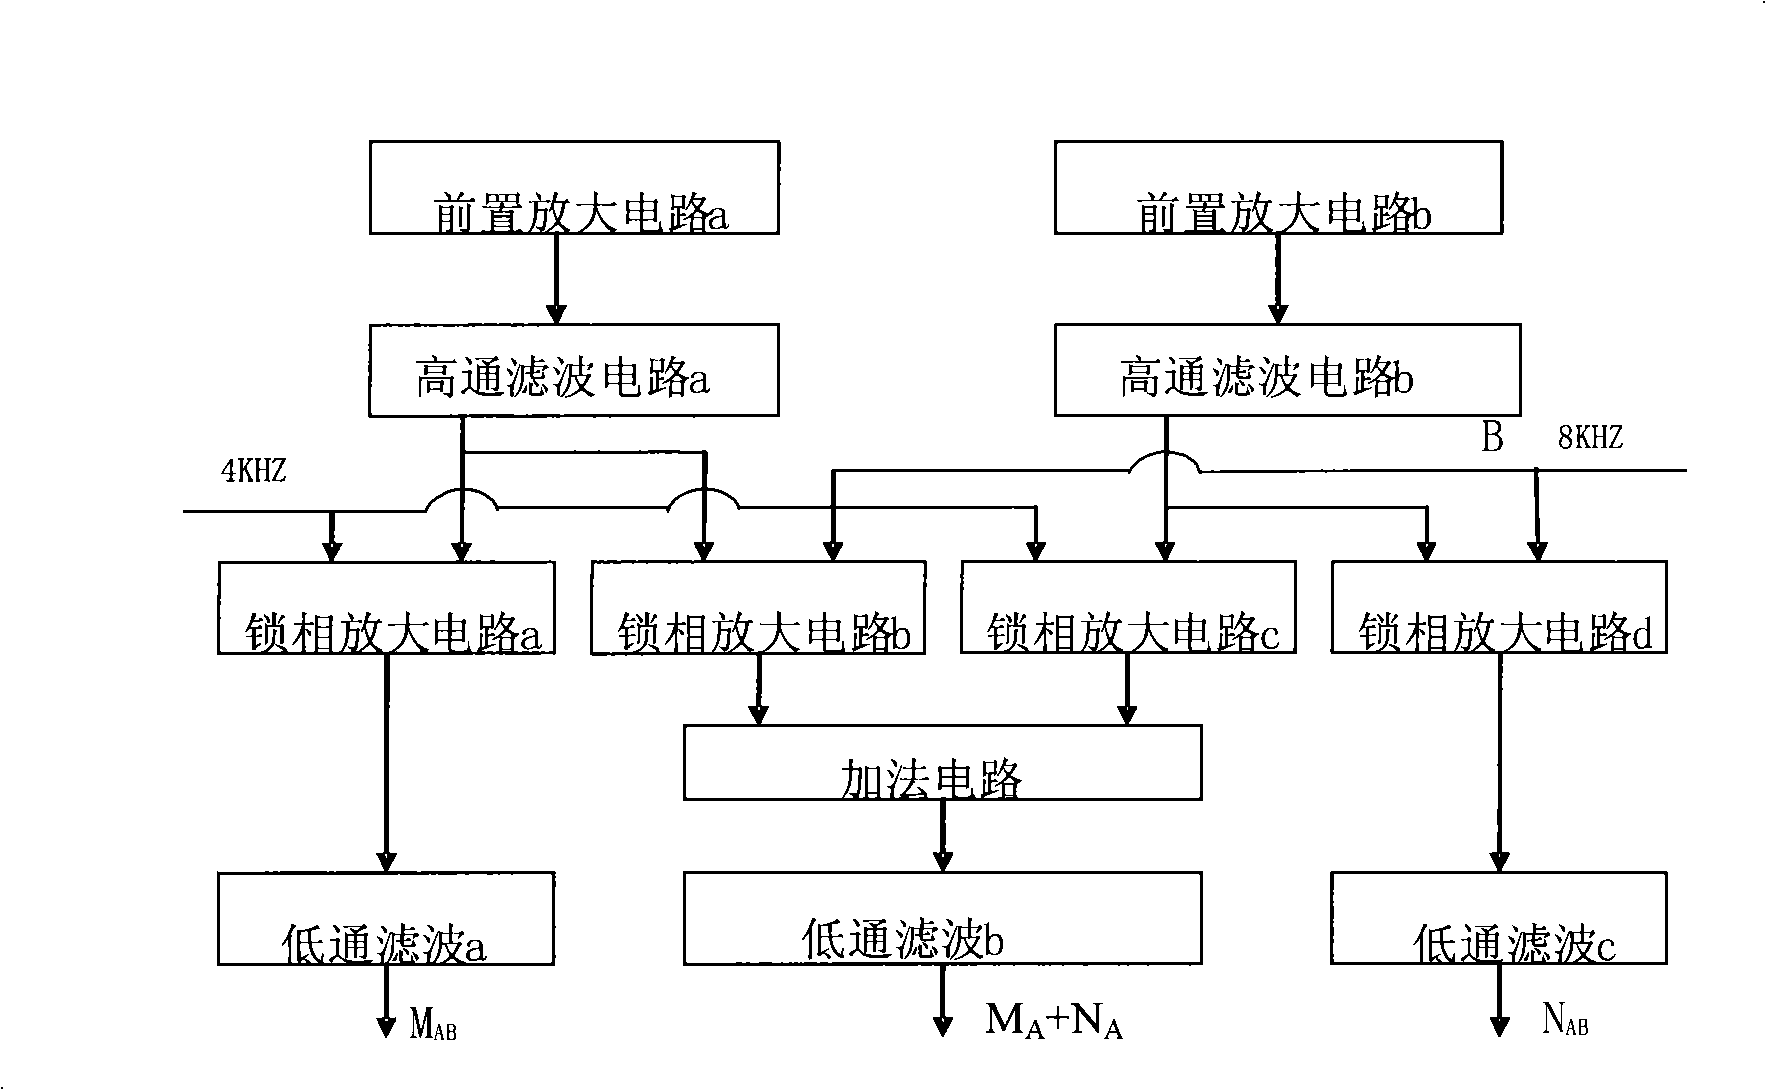 Optical recognition and distance measurer